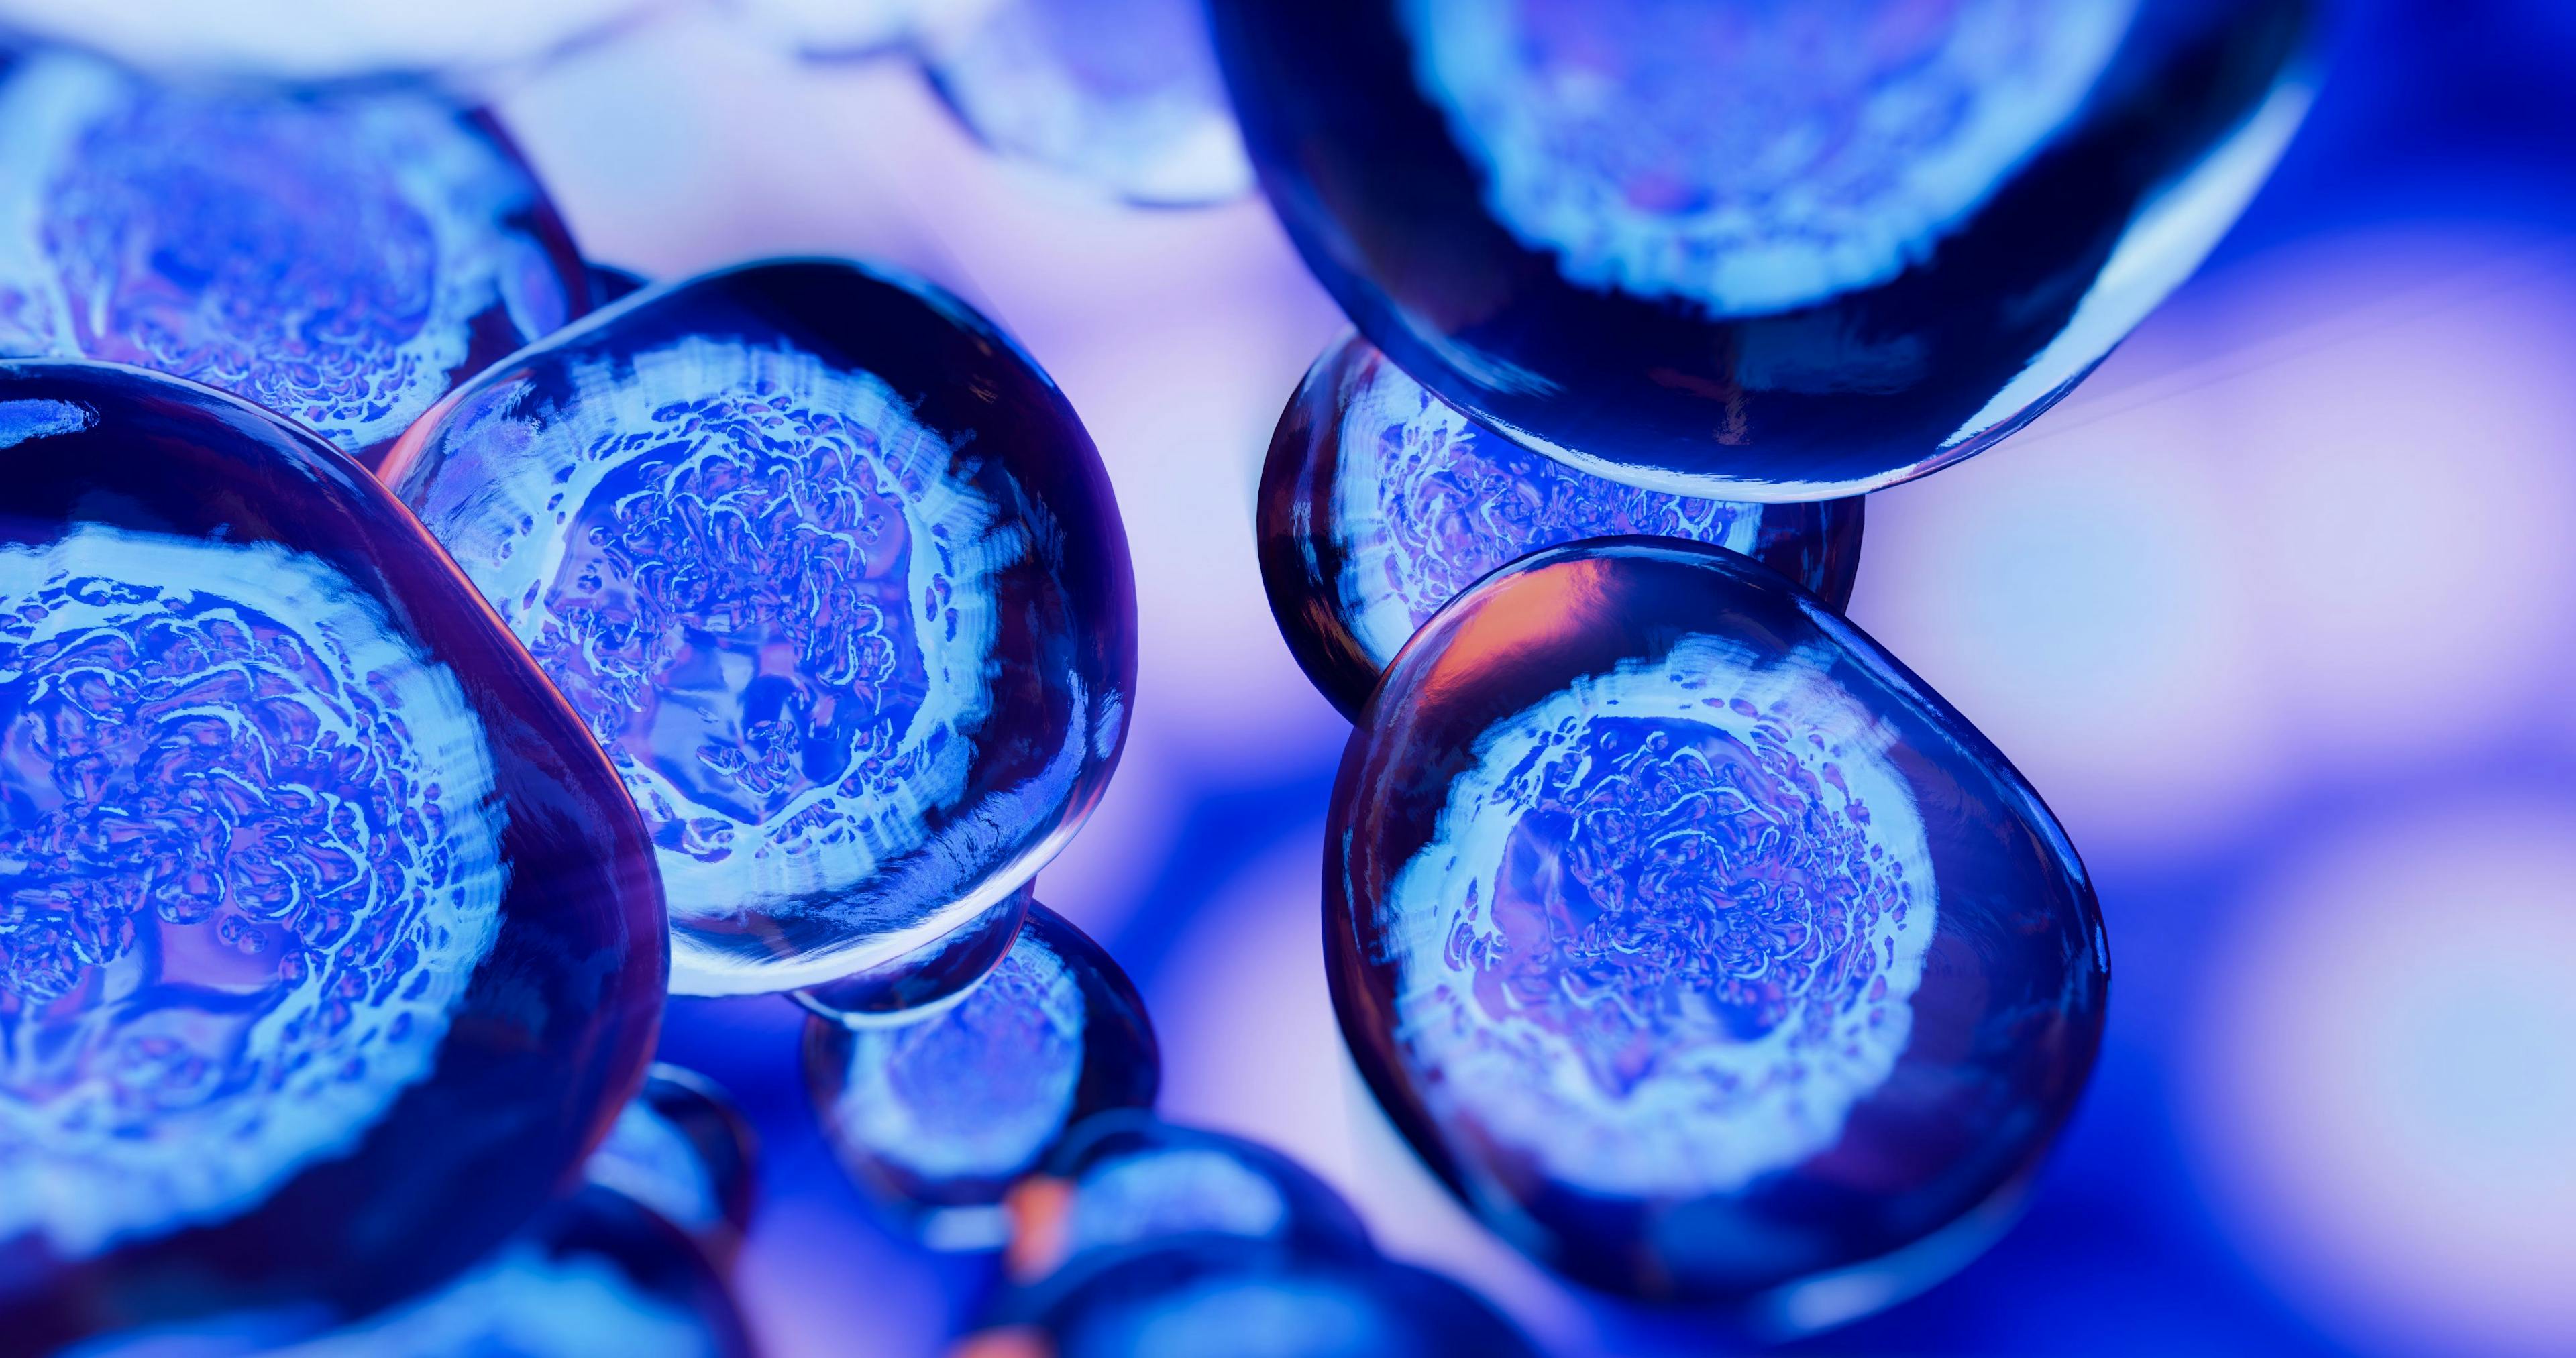 Creative image of embryonic stem cells, cellular therapy: © pinkeyes - stock.adobe.com